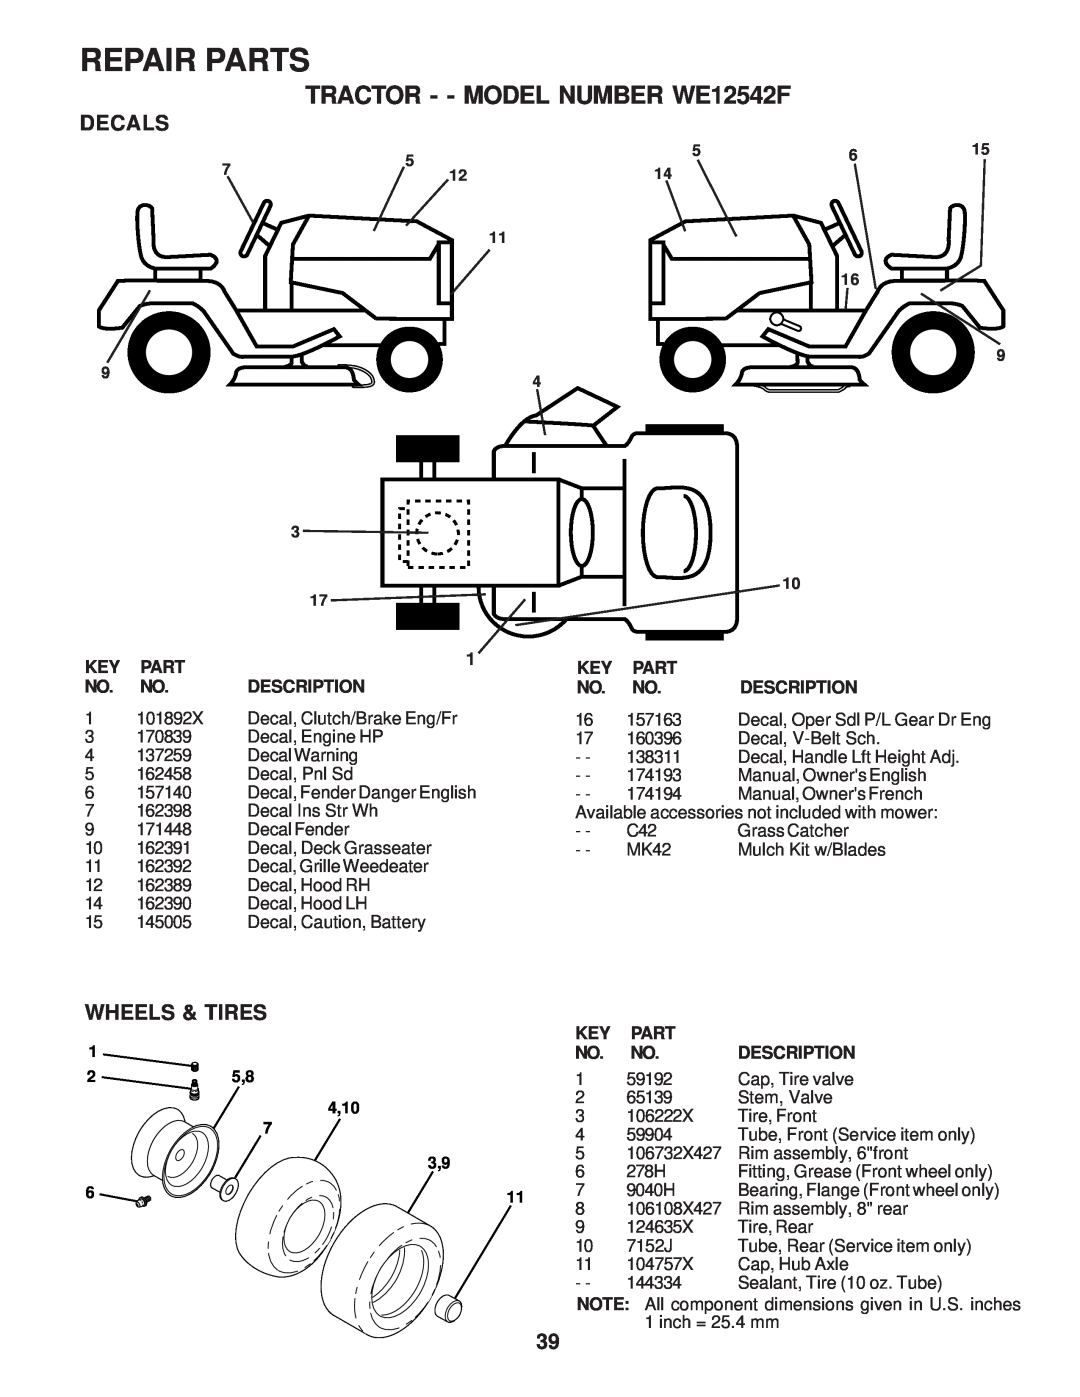 Weed Eater 174193 owner manual Decals, Wheels & Tires, Repair Parts, TRACTOR - - MODEL NUMBER WE12542F, 4,10 